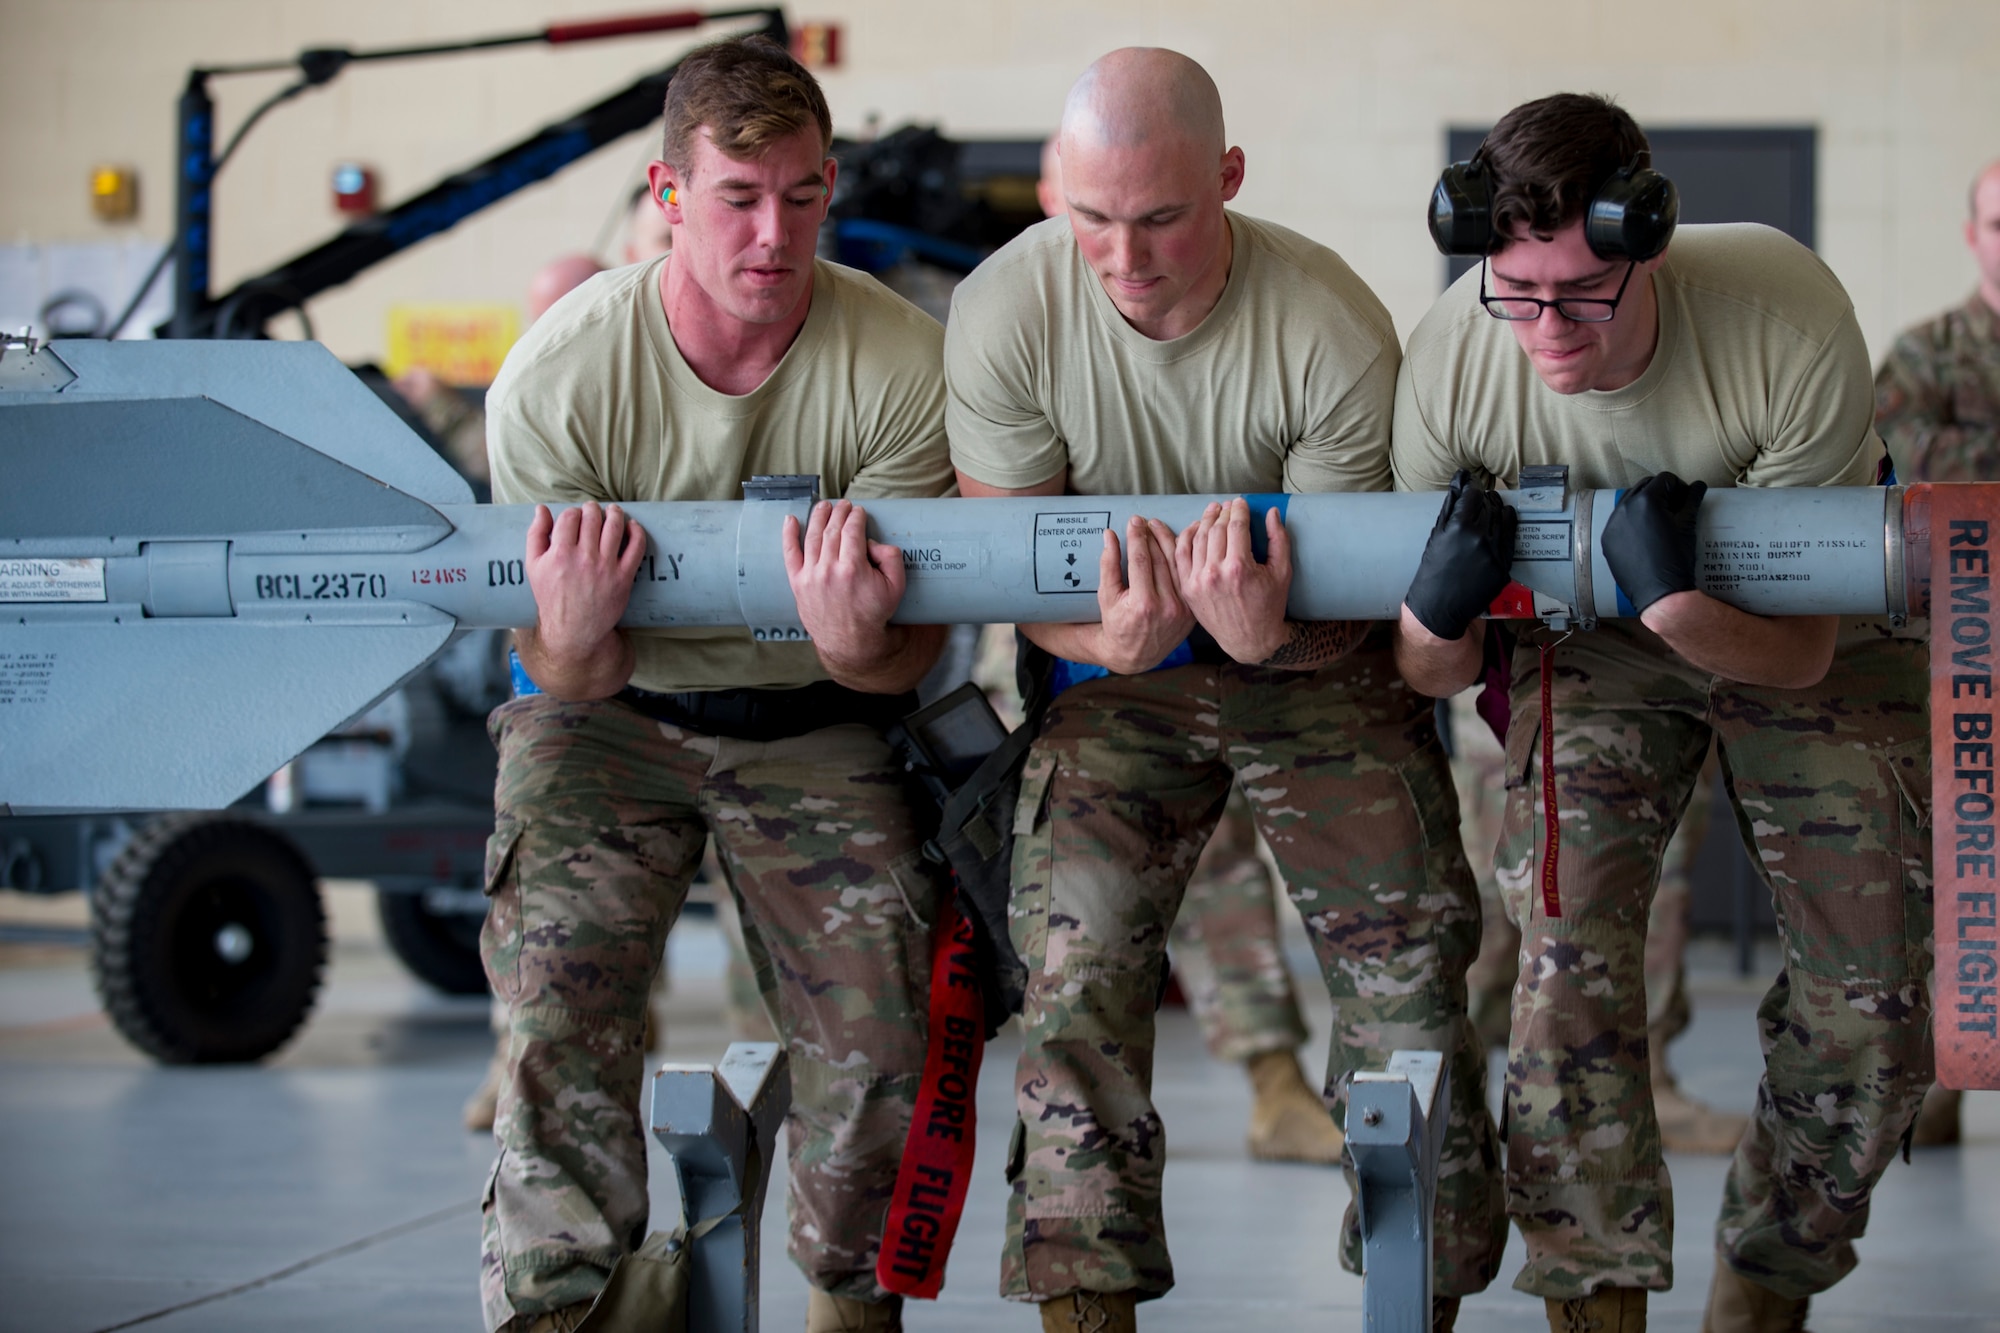 Airman 1st Class Hunter Leger, left, Staff Sgt. Ryan Amos, center, and Airman 1st Class Joseph Capshaw, right, all 74th Aircraft Maintenance Unit (AMU) weapons-load crewmembers, lift an inert AIM-9 air-to-air missile during a weapons-load competition, Feb. 22, 2018 at Moody Air Force Base, Ga. Judges assessed the 75th and 74th AMUs on how quickly and efficiently they loaded munitions onto an A-10C Thunderbolt II during the loading portion of the competition. They were also judged on dress and appearance and a written test based on munition knowledge. (U.S. Air Force photo by Senior Airman Daniel Snider)